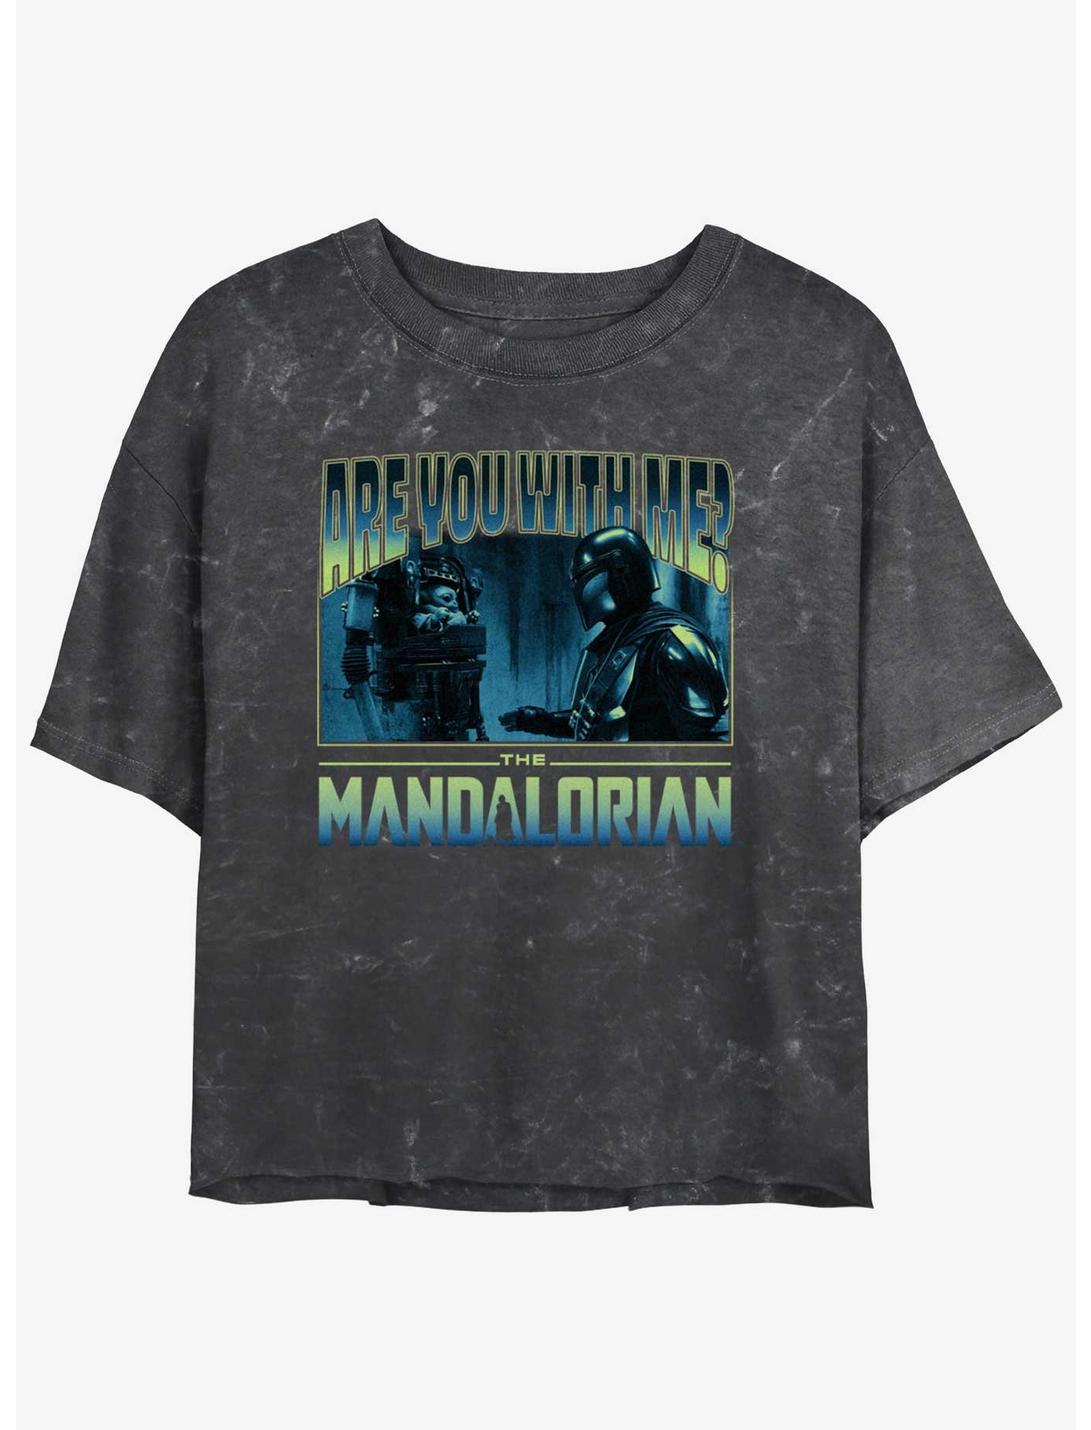 Star Wars The Mandalorian Are Your With Me Grogu Womens Mineral Wash Crop T-Shirt, BLACK, hi-res